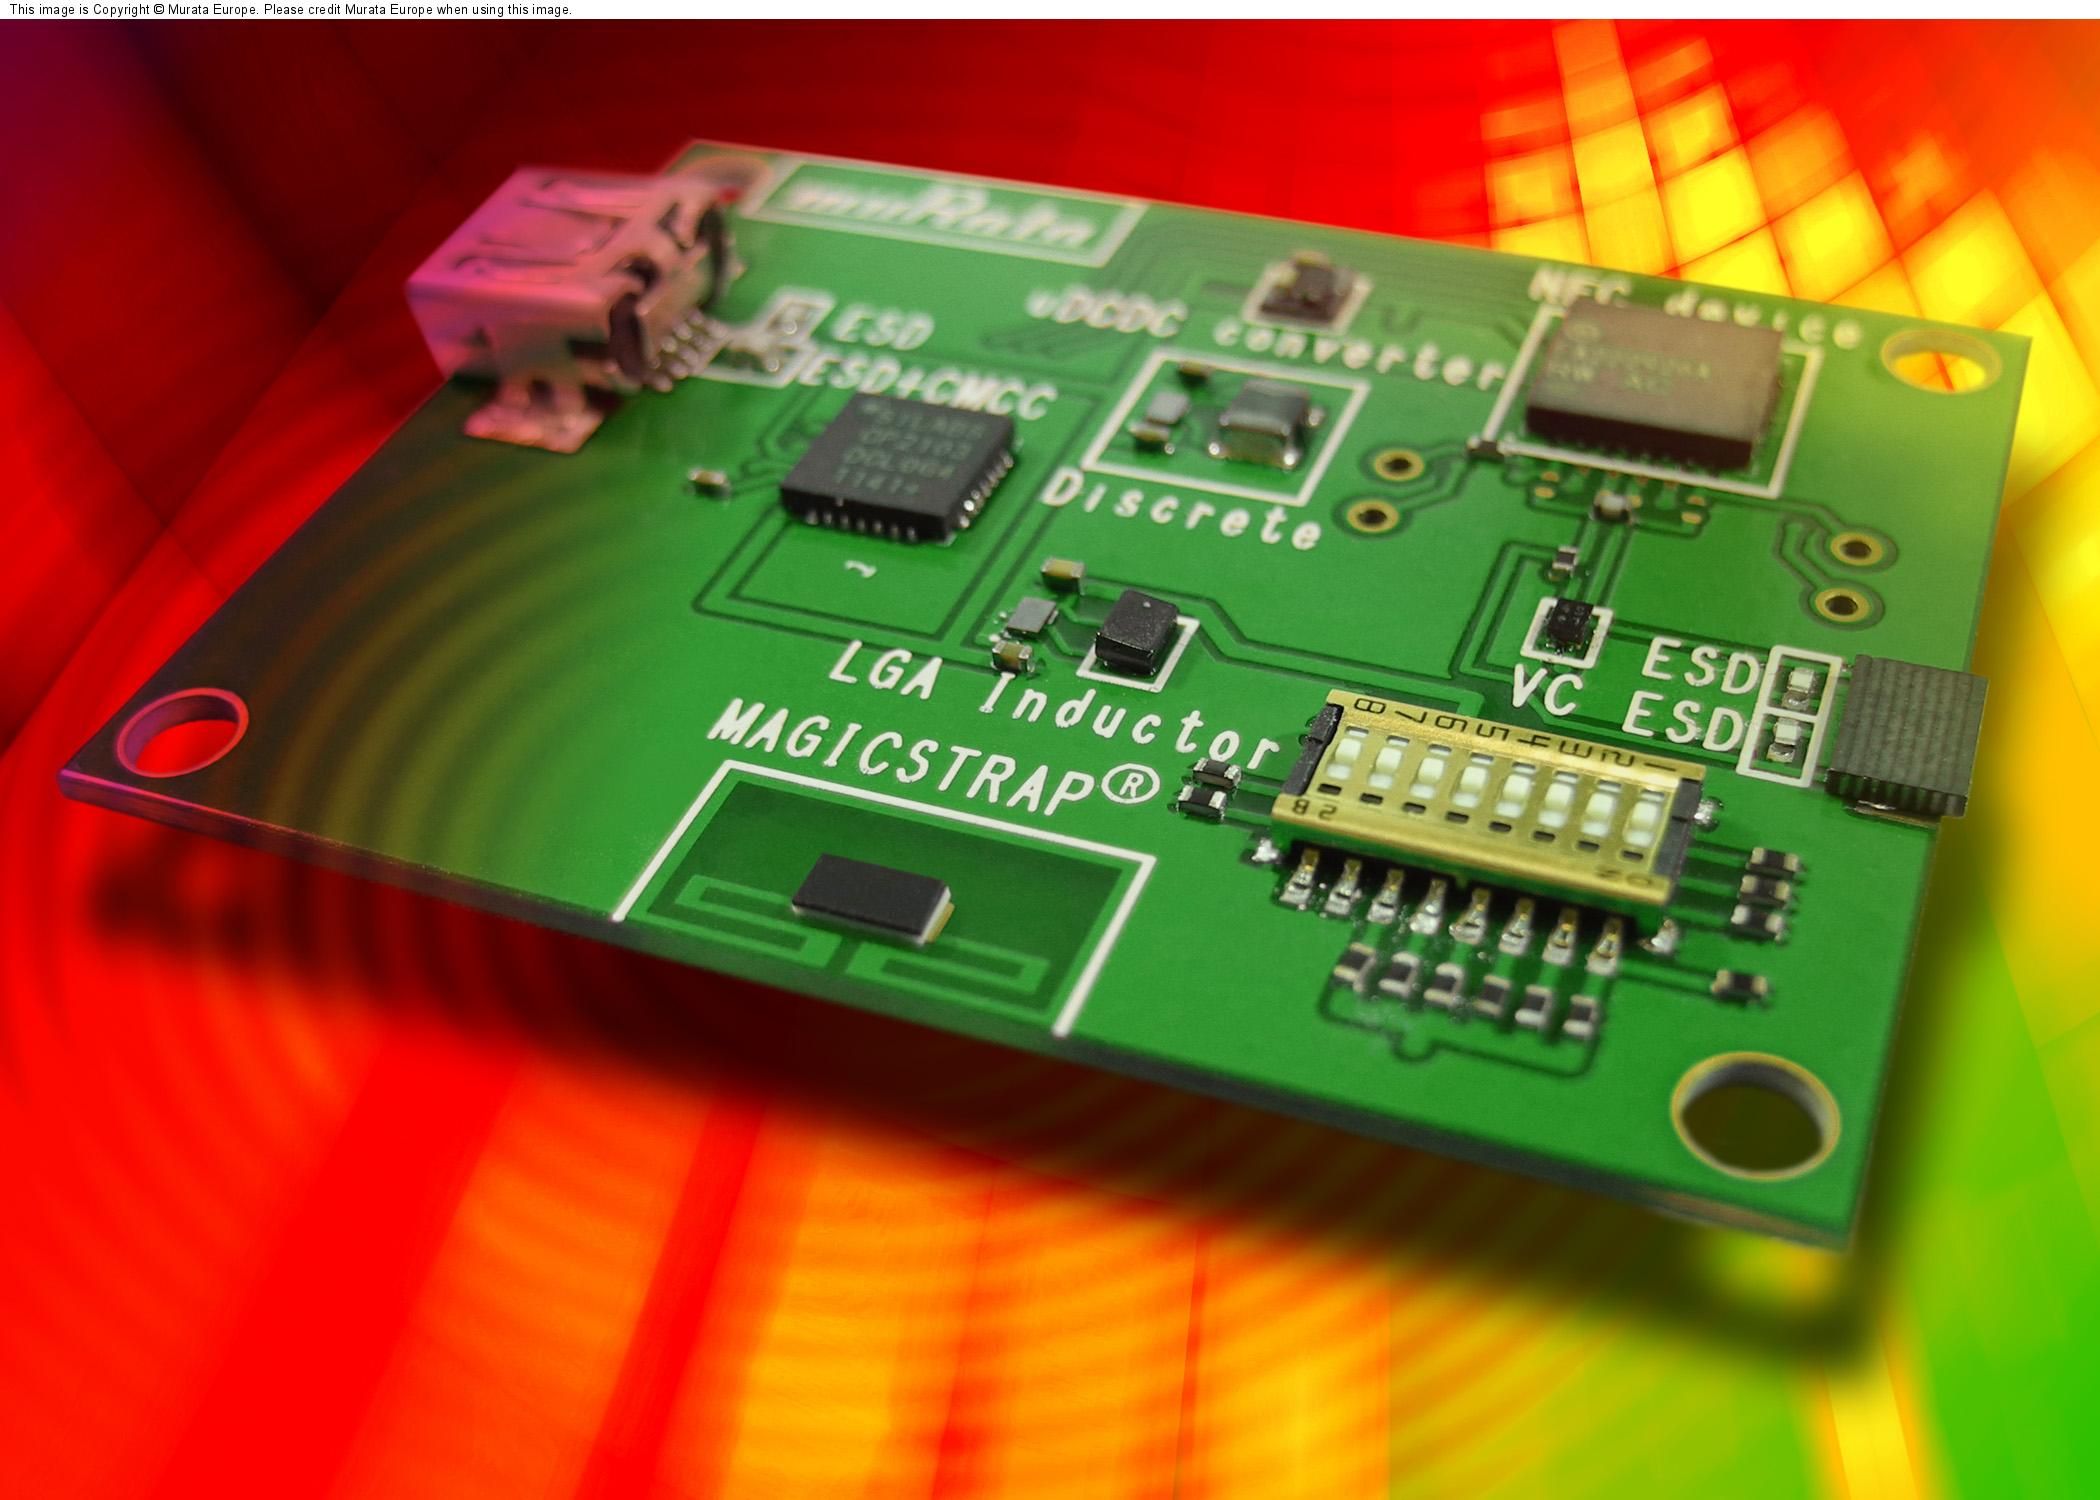 Image from http://www.murata.eu/news/en/pr/pcb-mounted-rfid-tag-solution-from-MUR247.